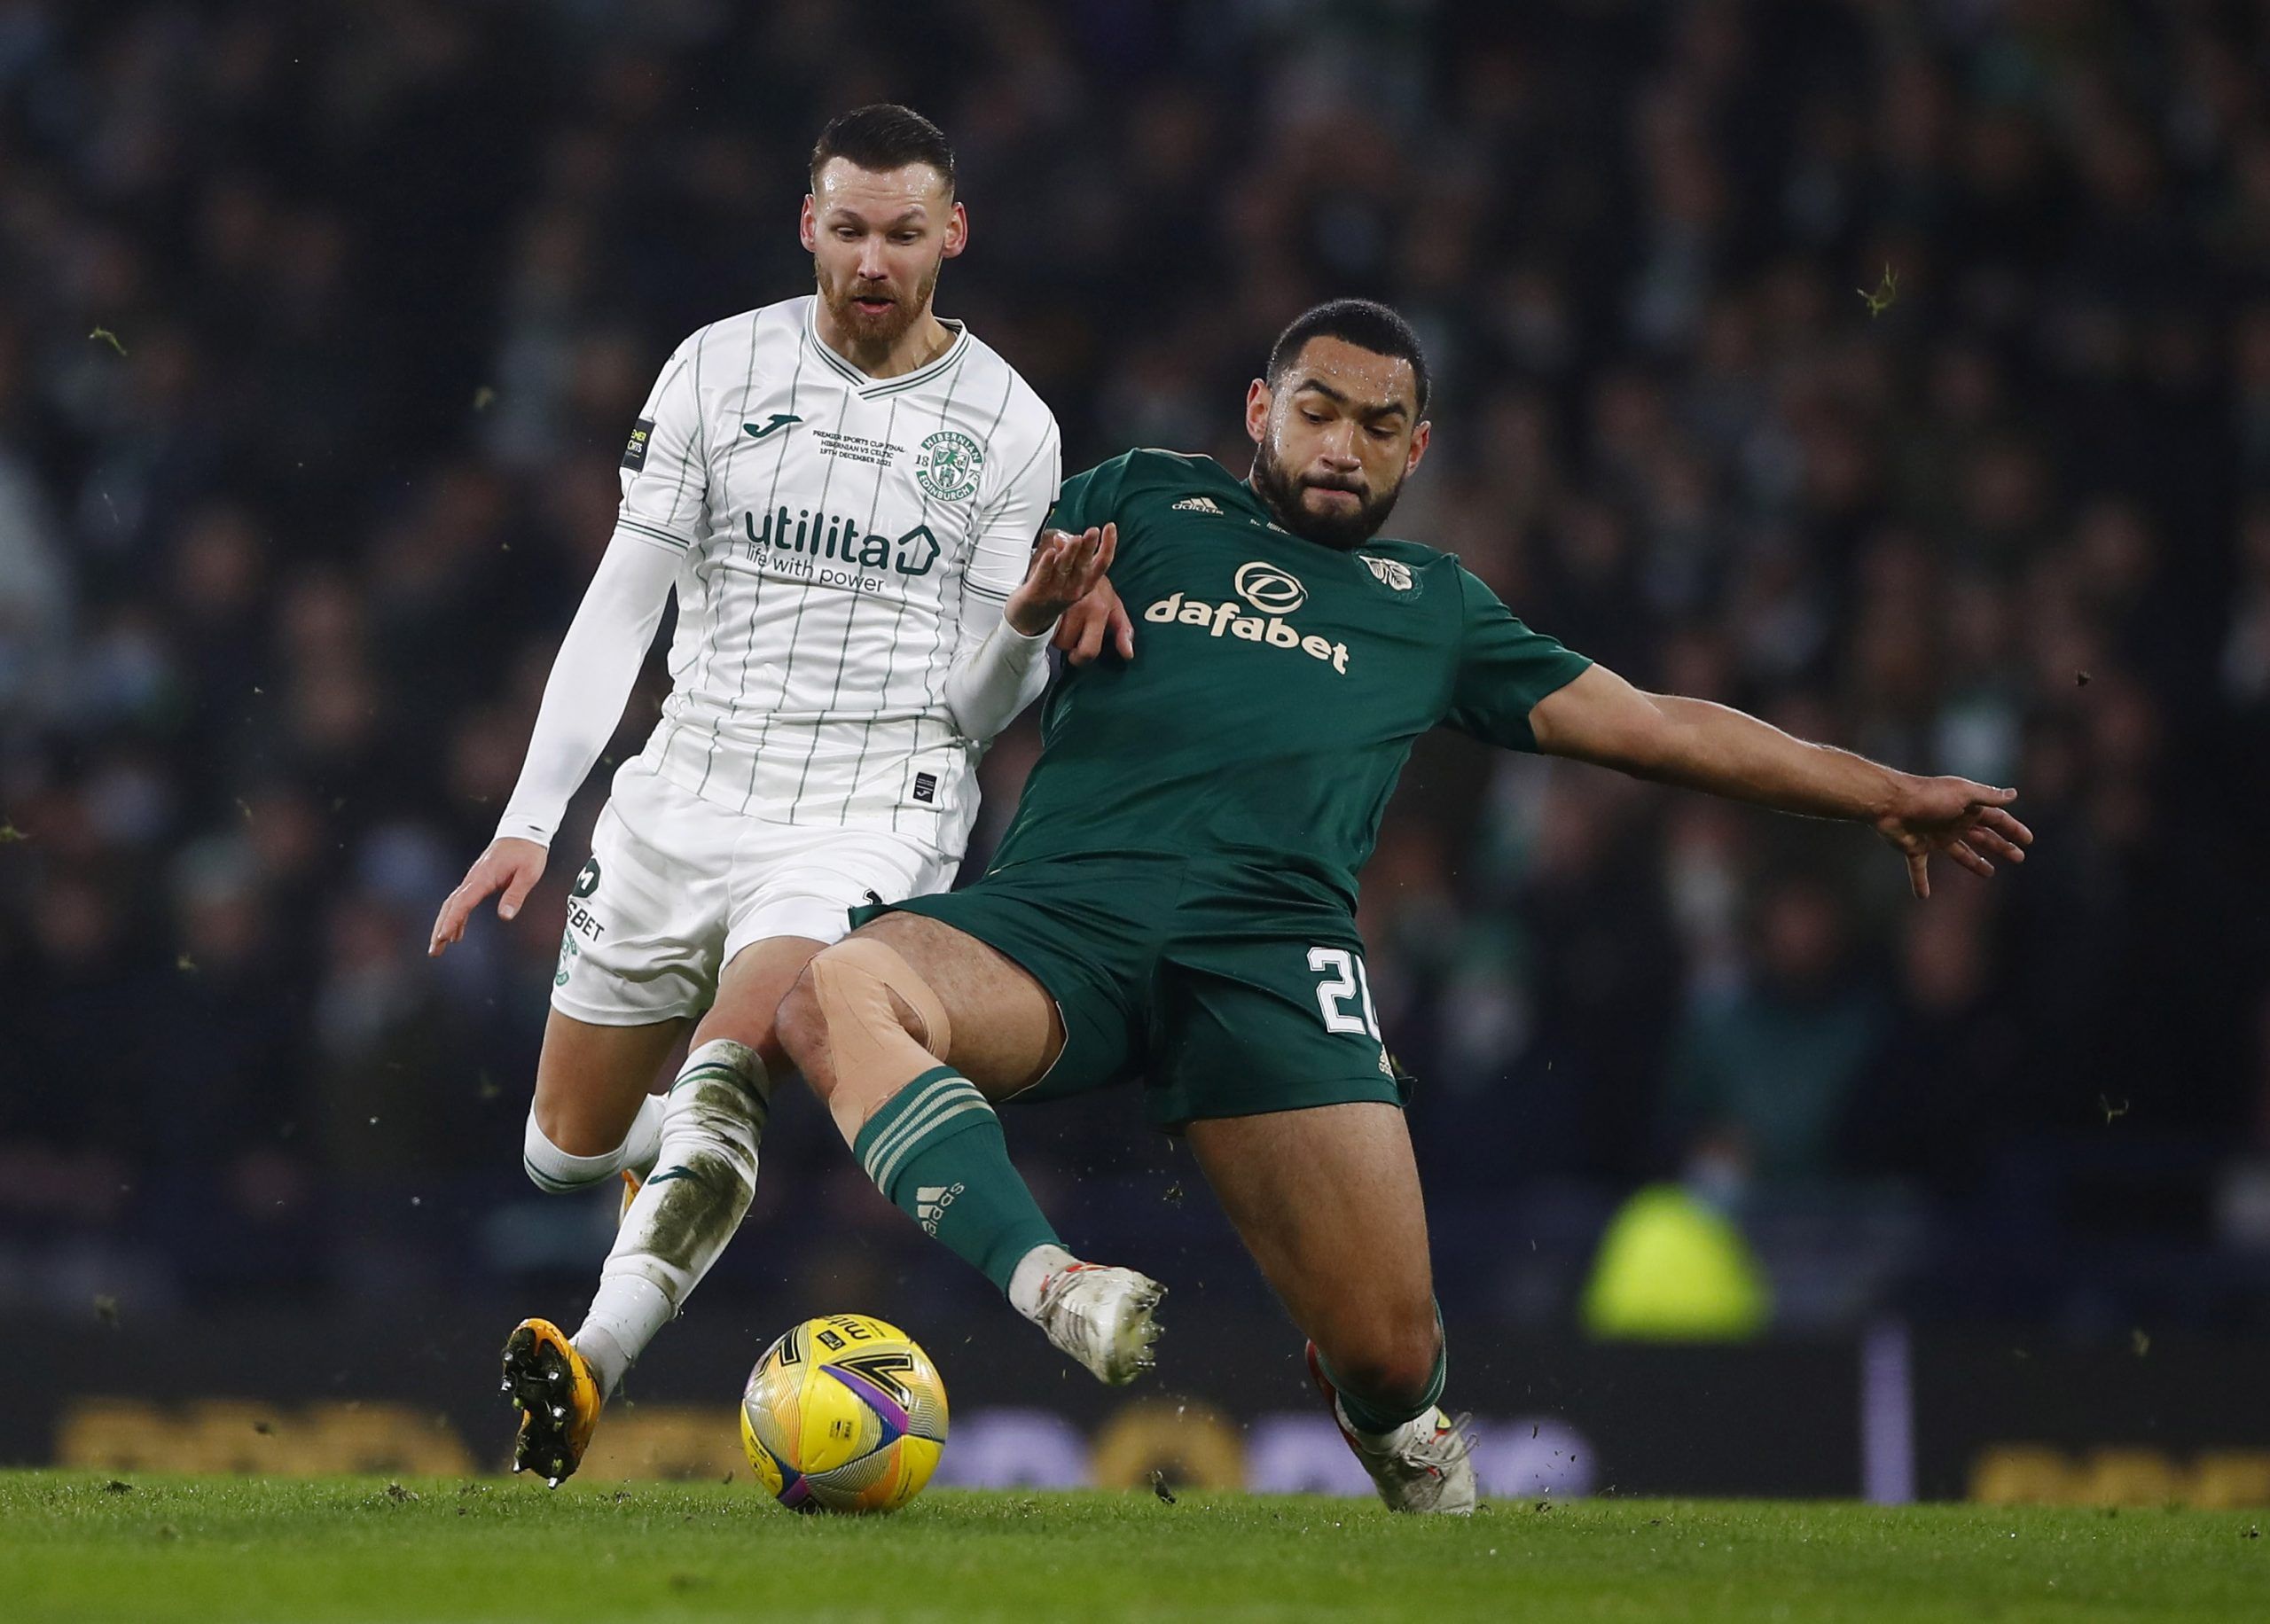 Celtic's Cameron Carter-Vickers in action